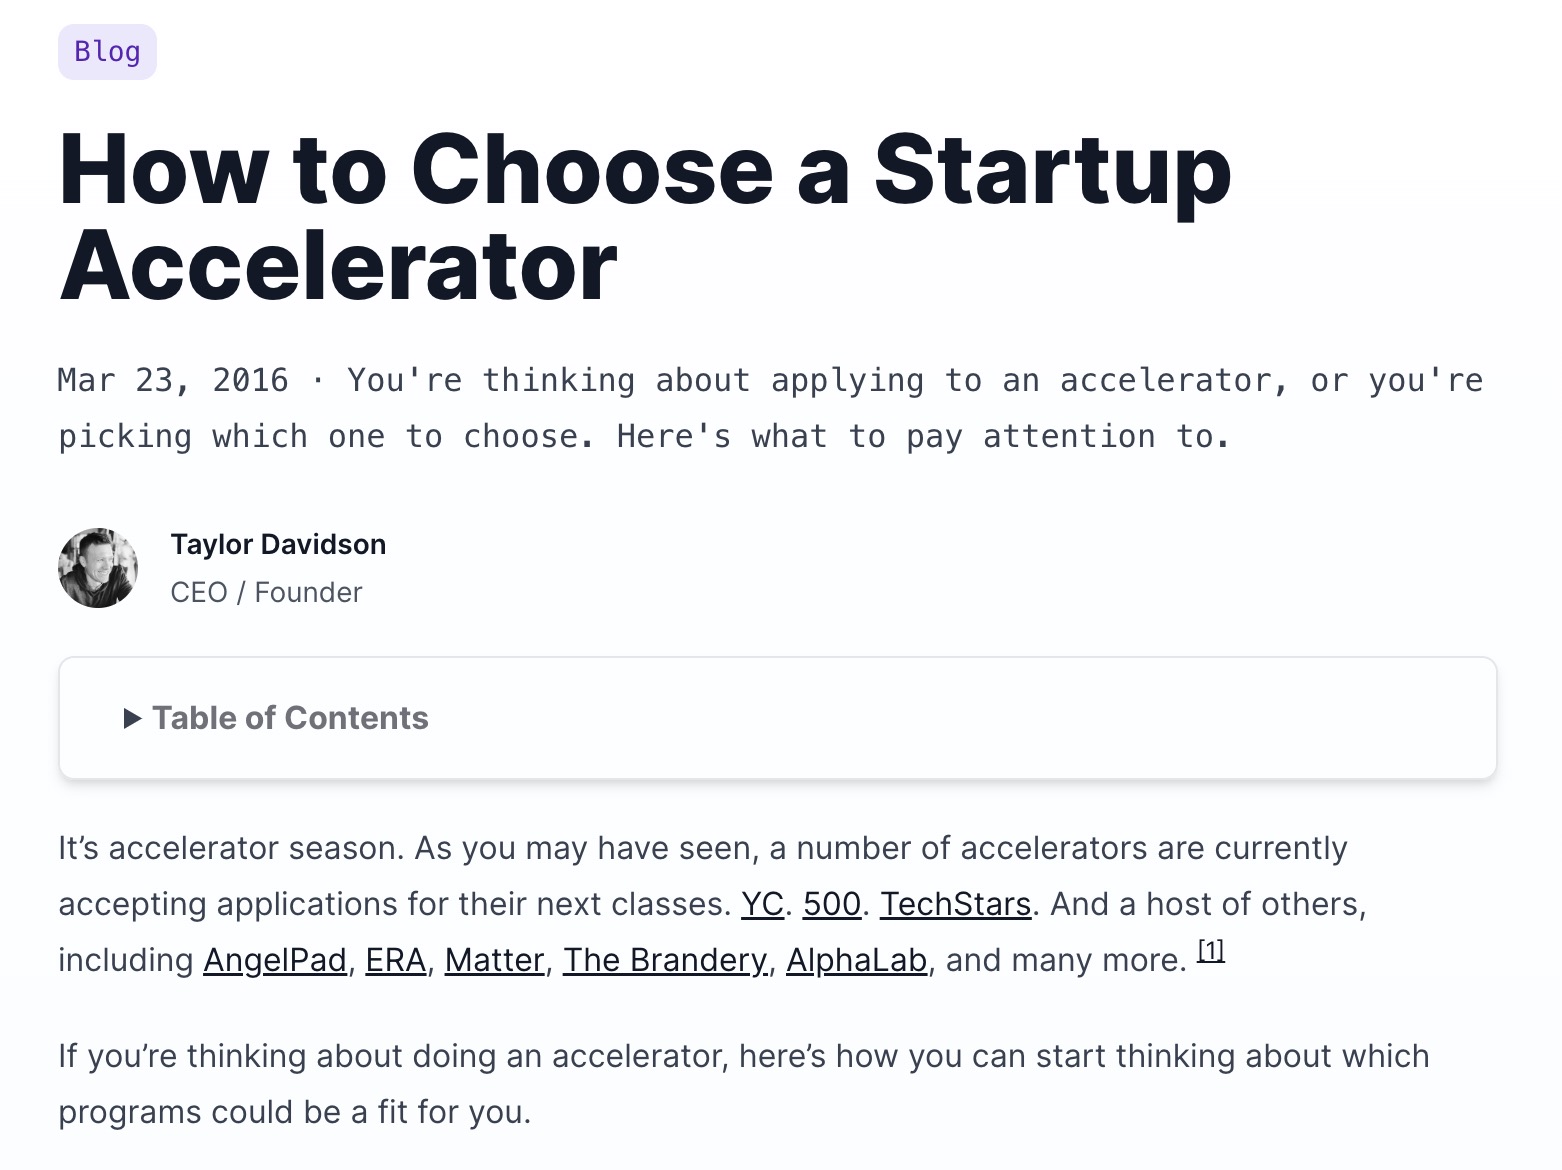 How to Choose a Startup Accelerator